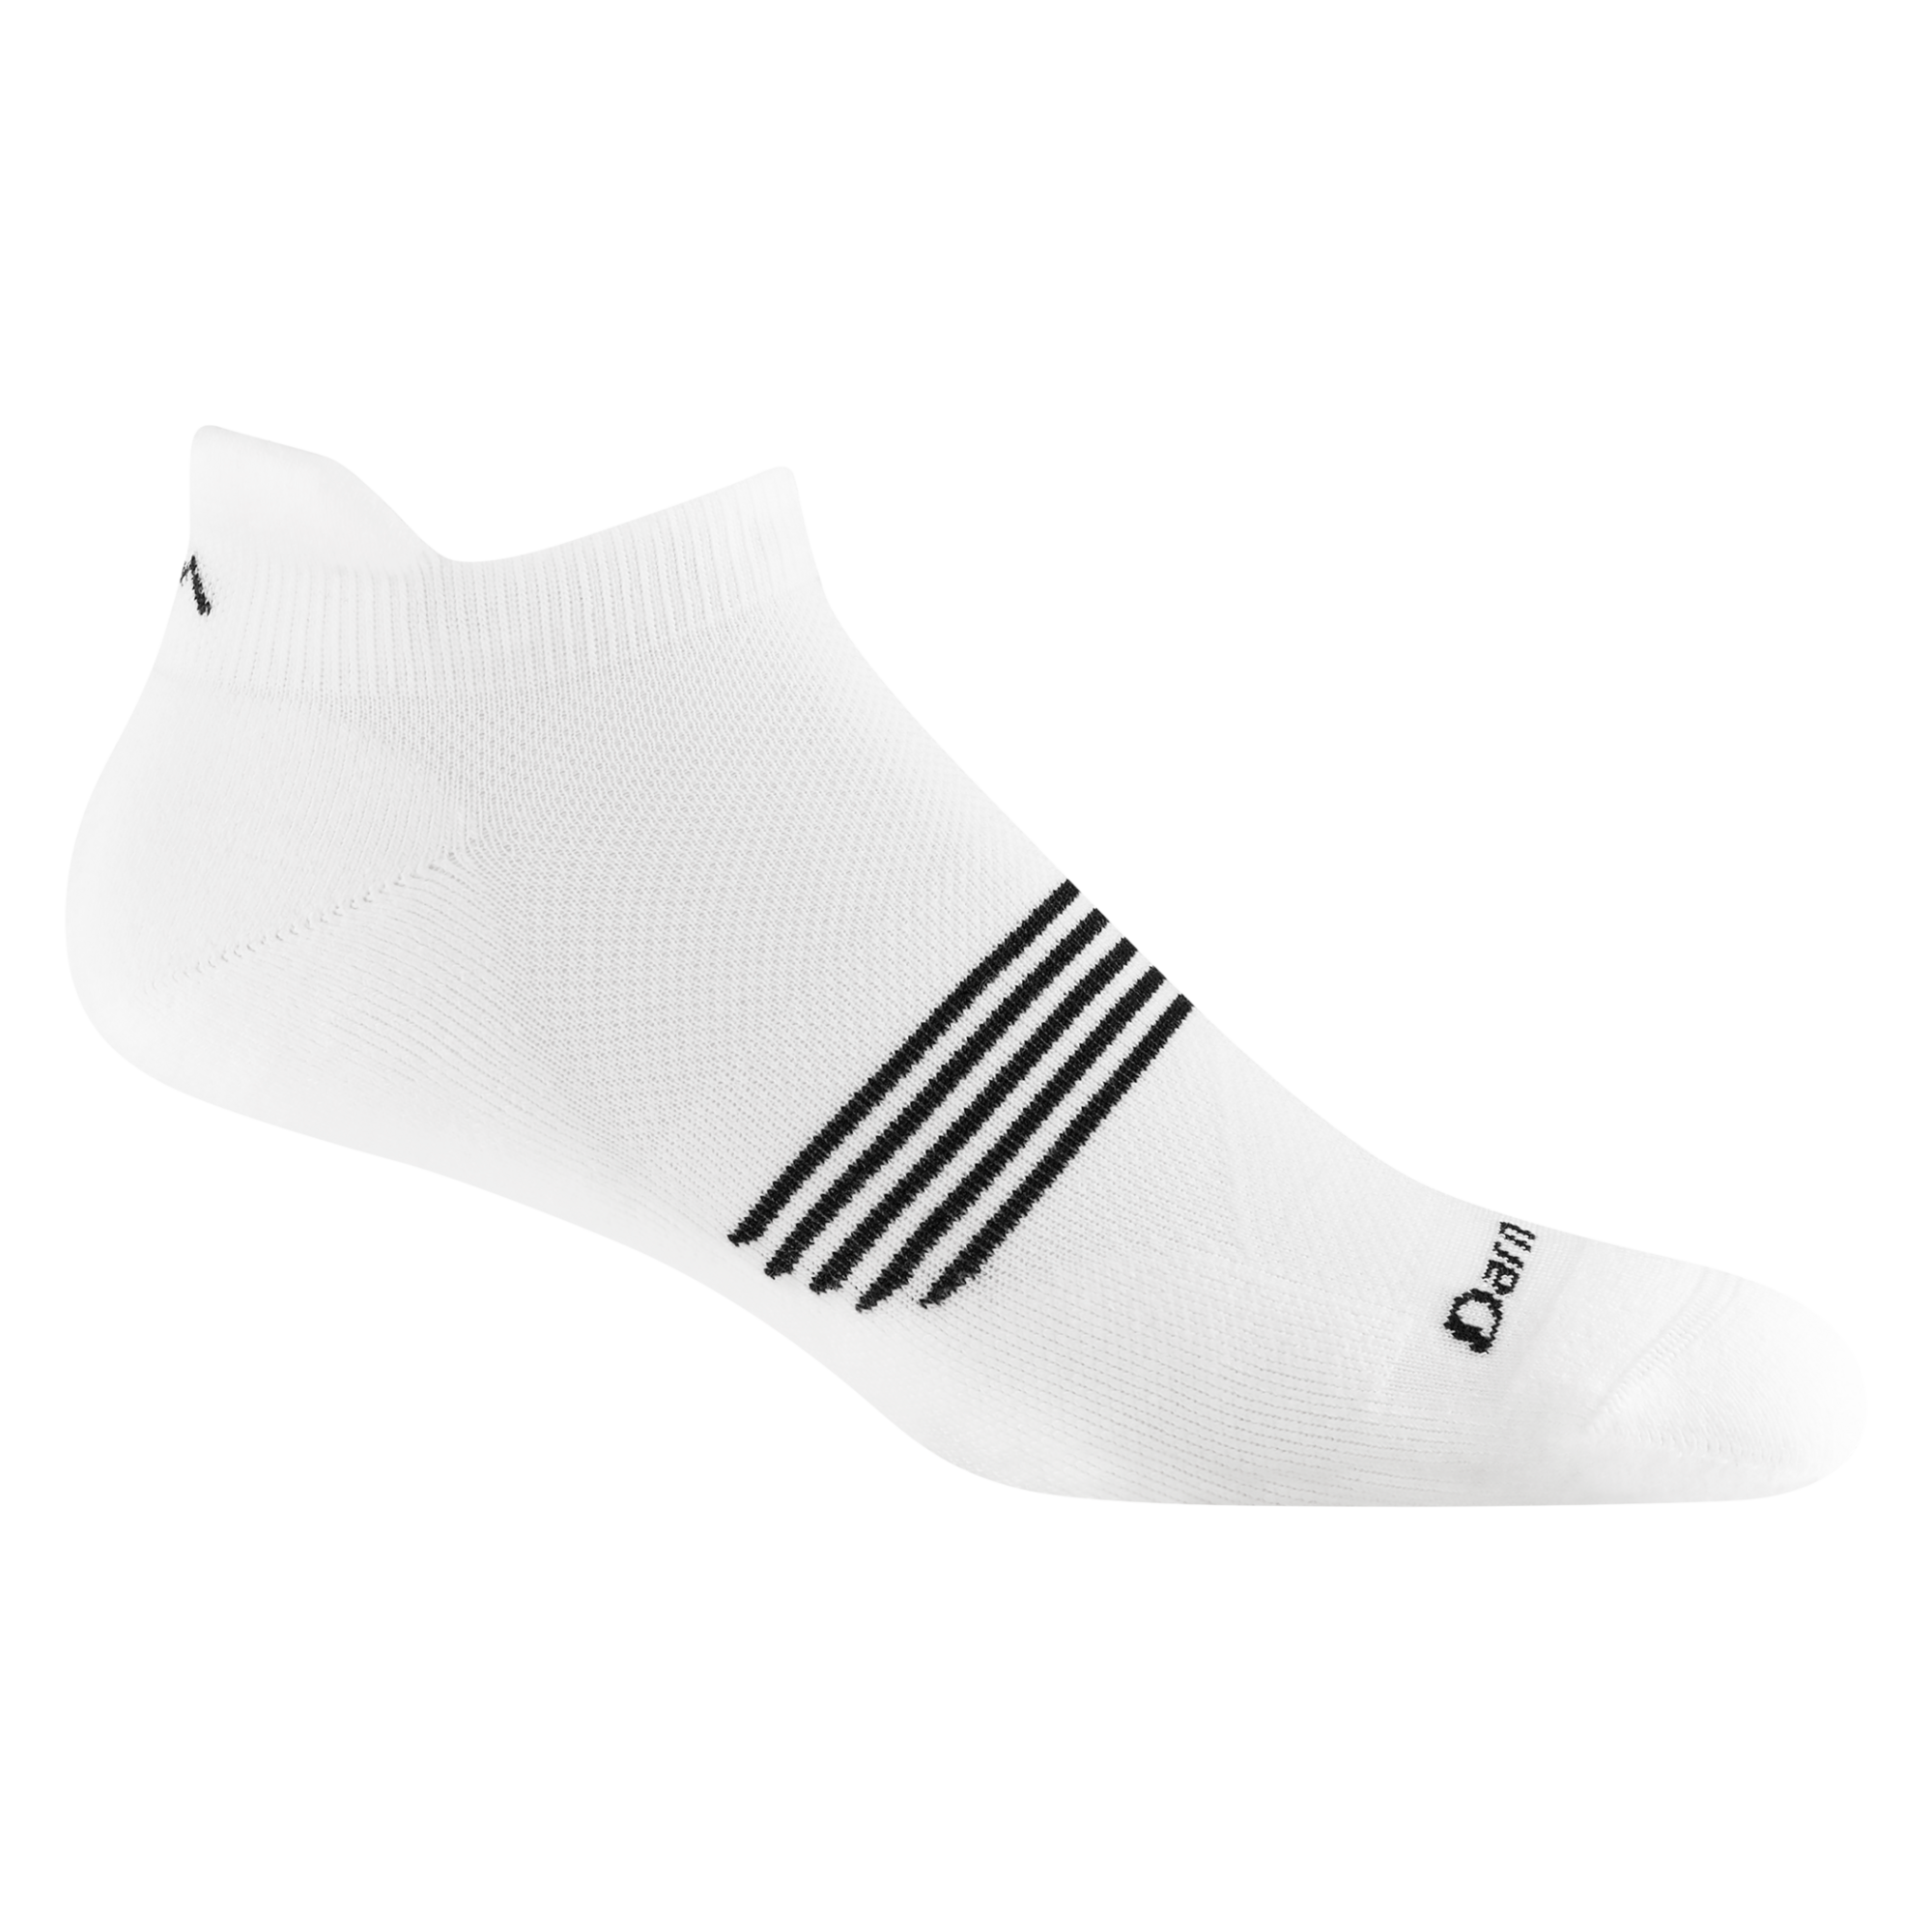 1116 men's element no show tab running sock in color white with black forefoot striping and darn tough signature